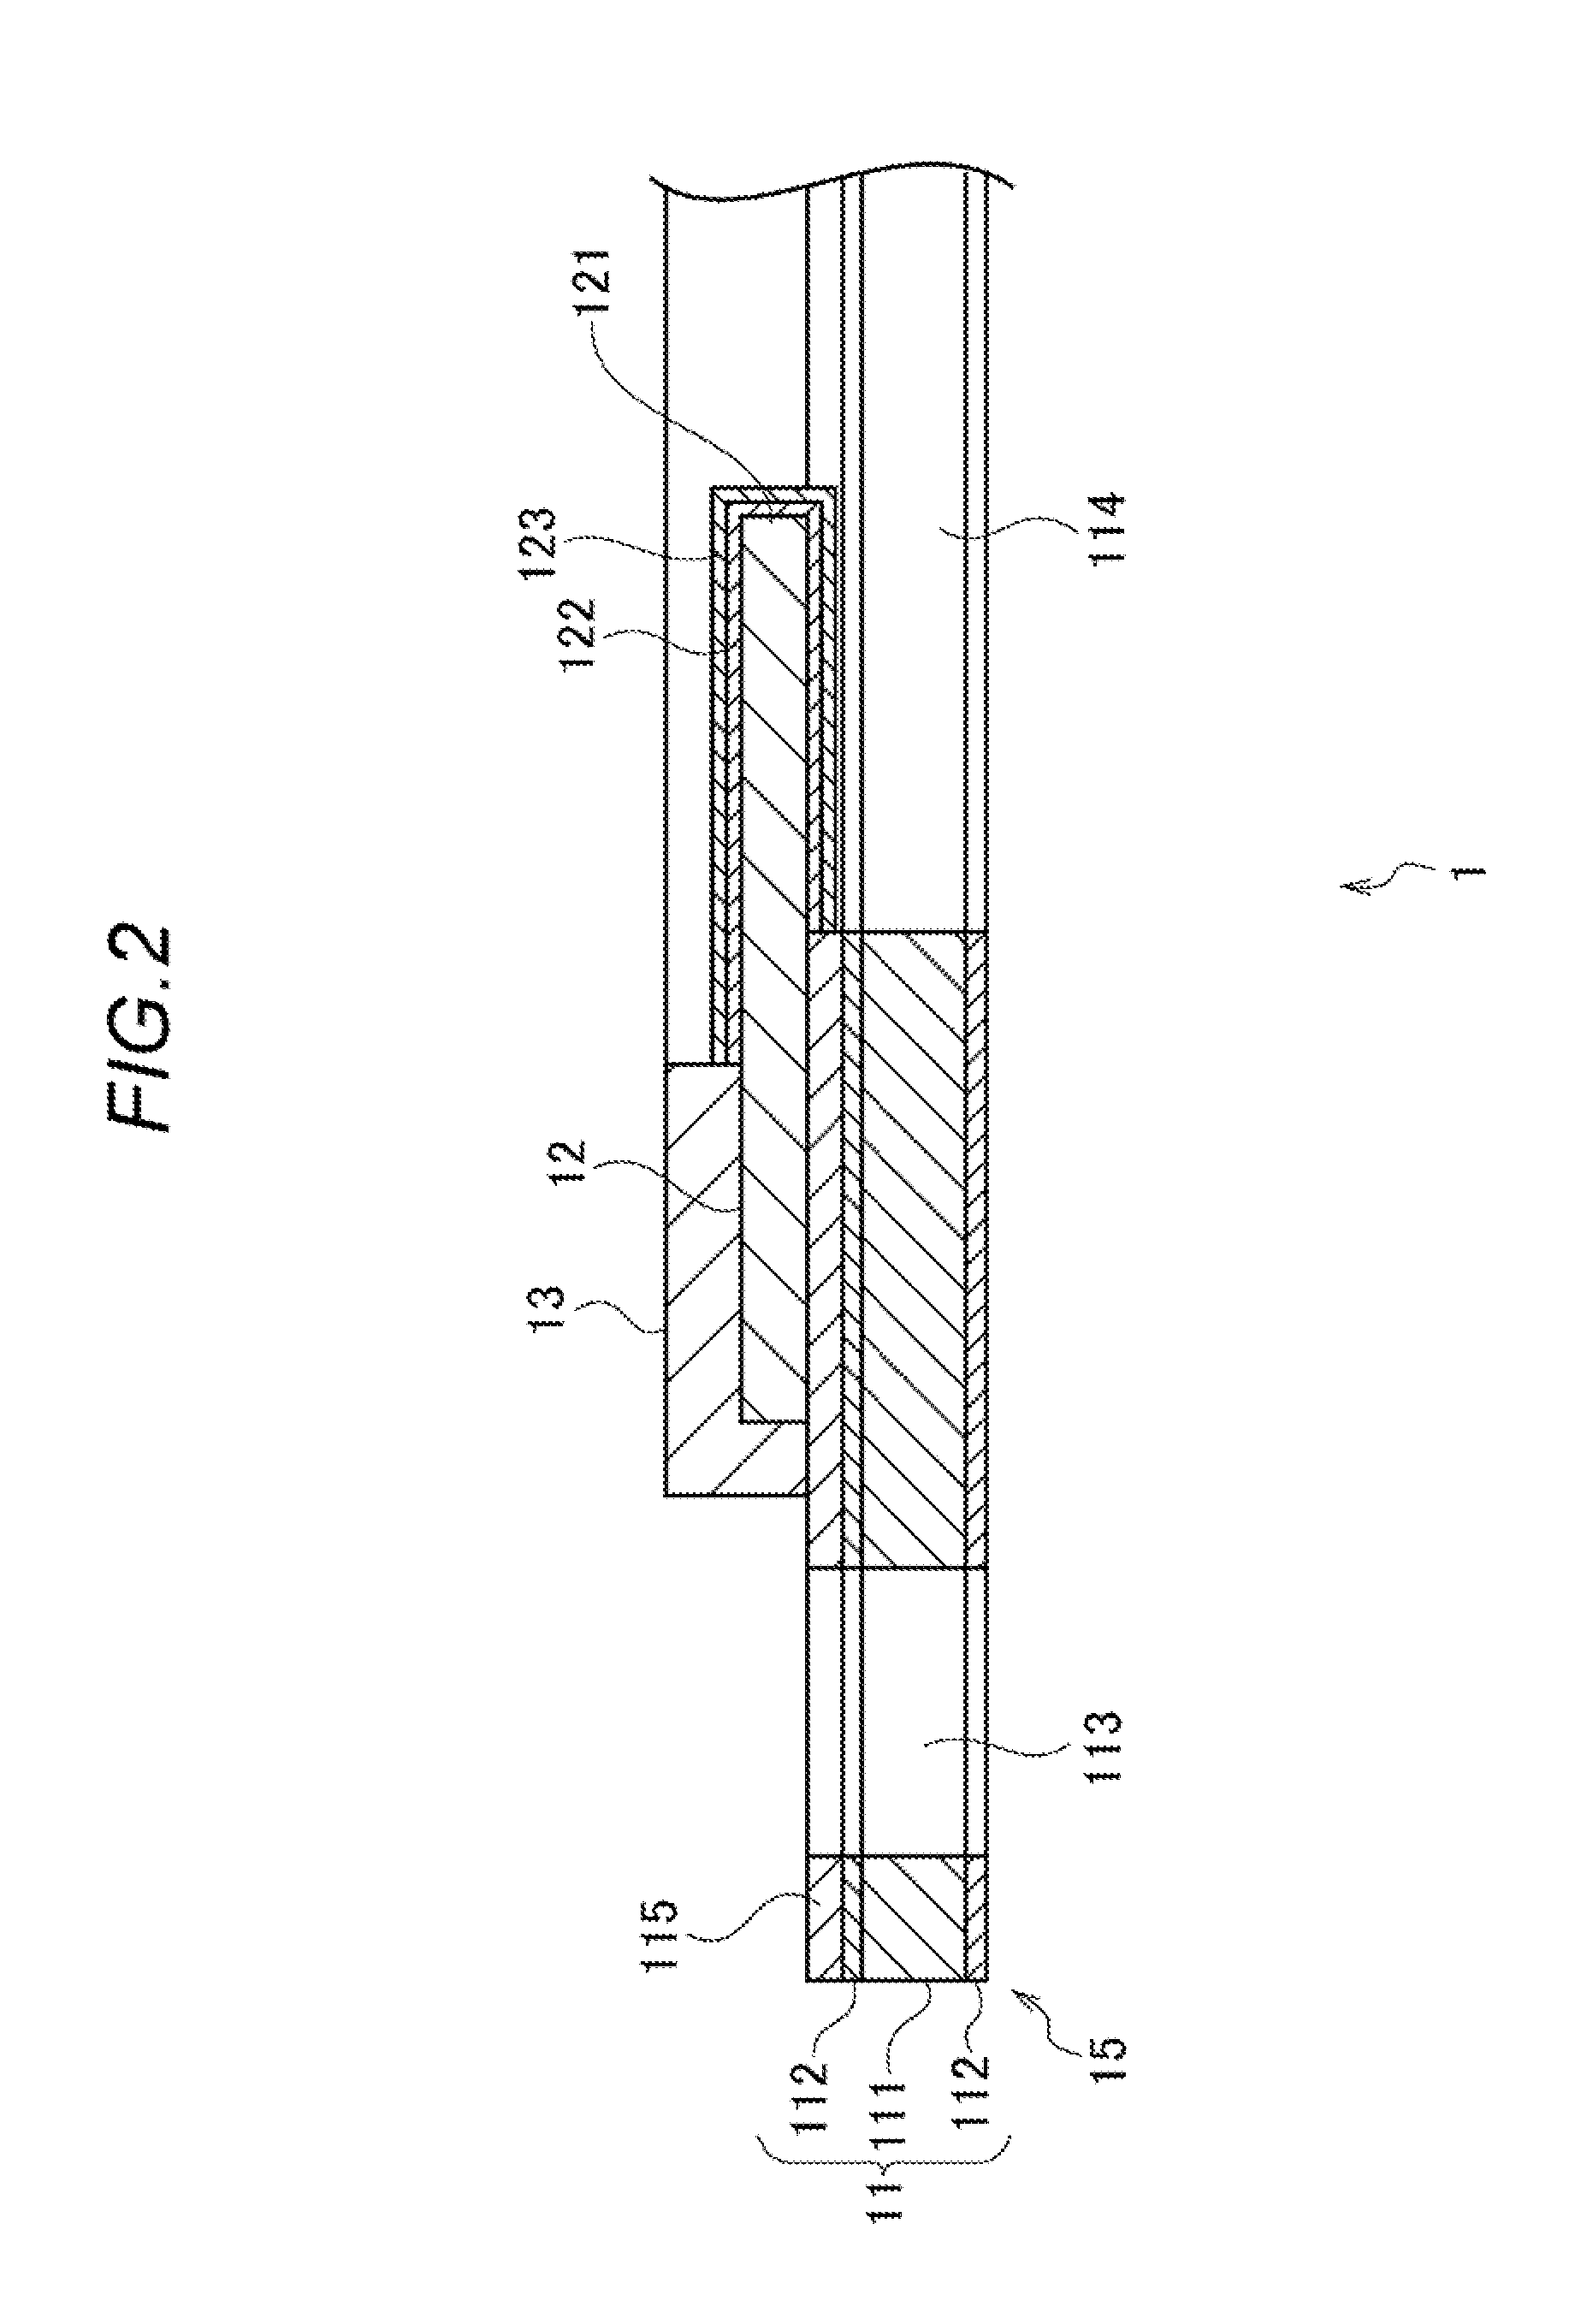 Flexible circuit board for mounting light emitting element, illumination apparatus, and vehicle lighting apparatus